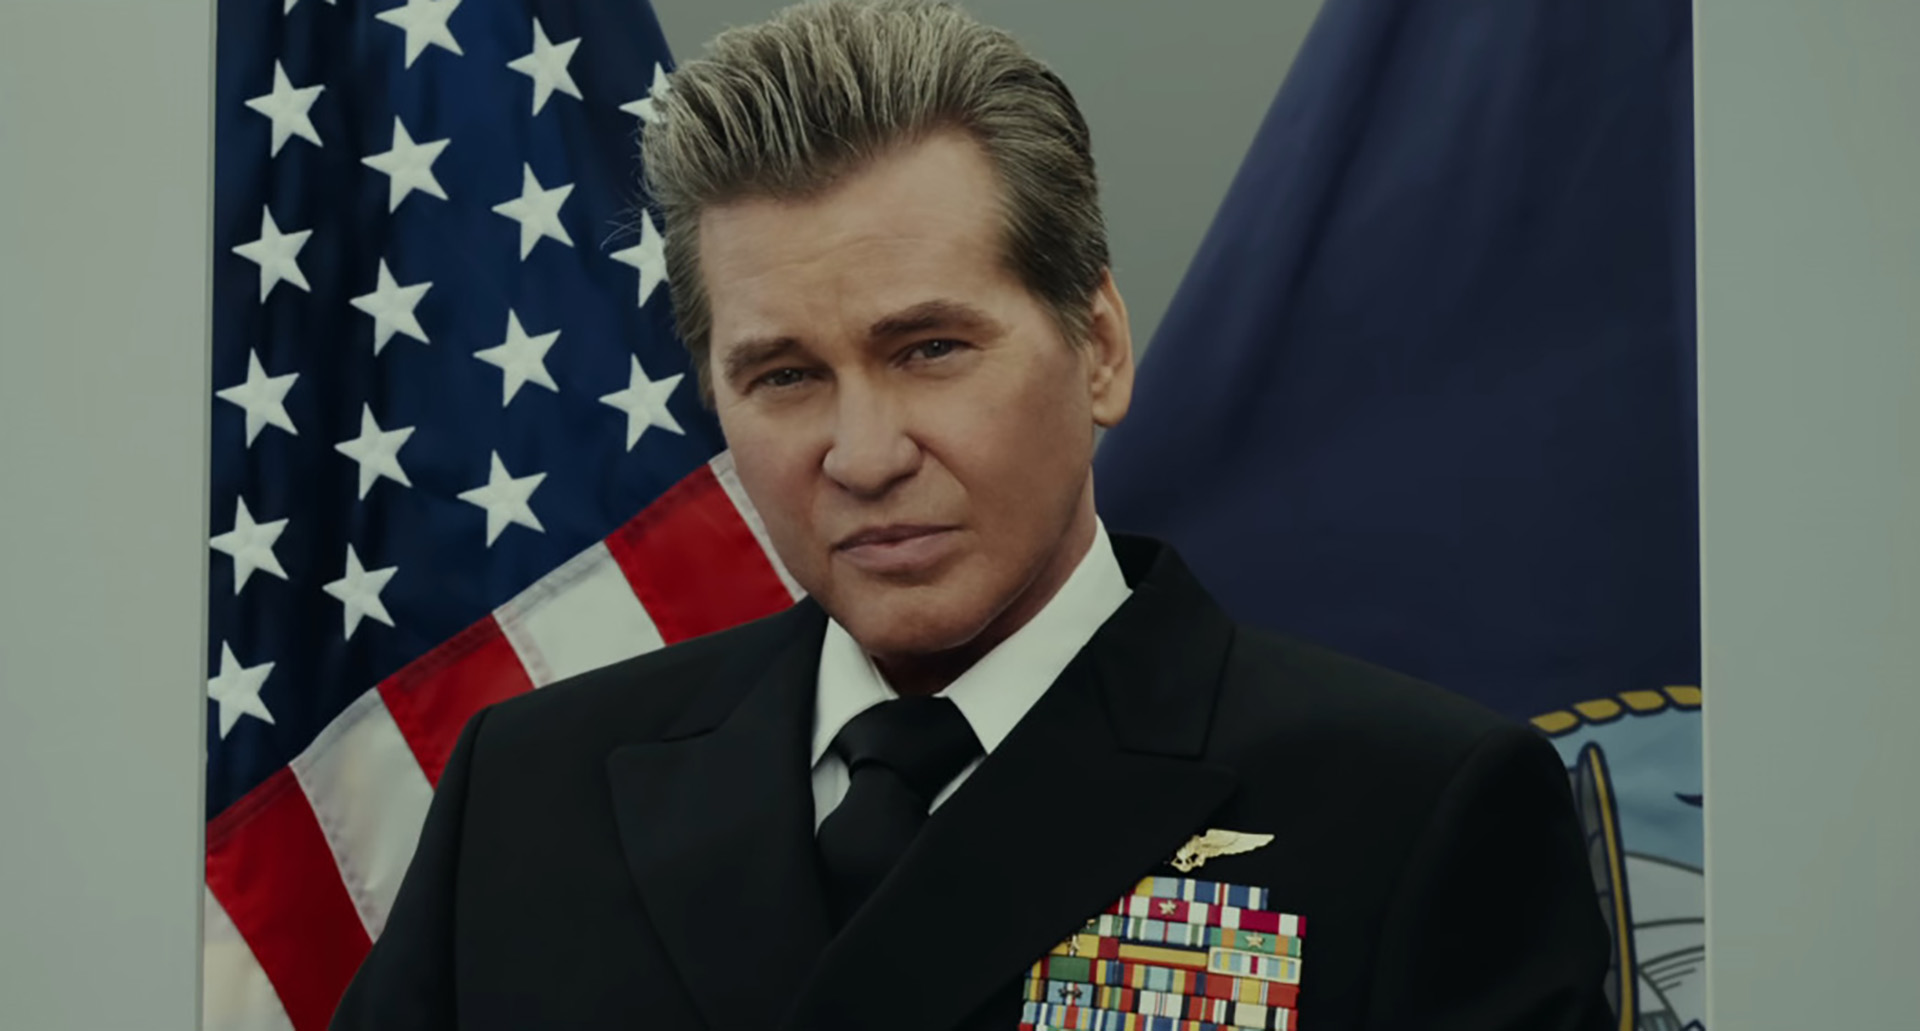 Val Kilmer Spoke in Top Gun: Maverick with Help from A.I. Voice Models